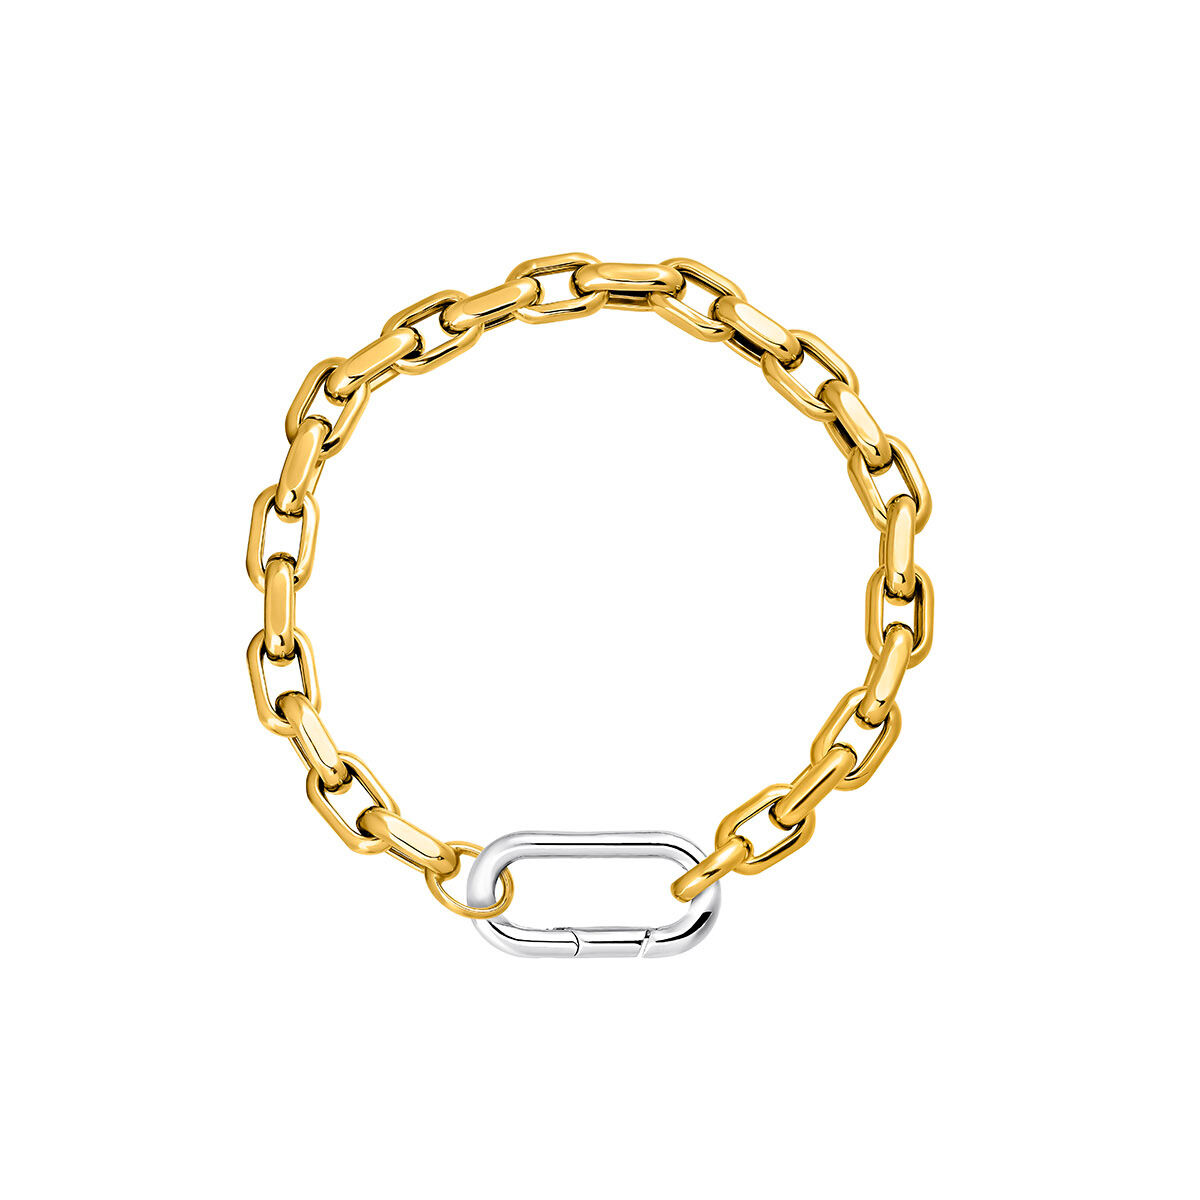 Cable link bracelet in 18k yellow gold-plated silver, J05336-02-17, hi-res